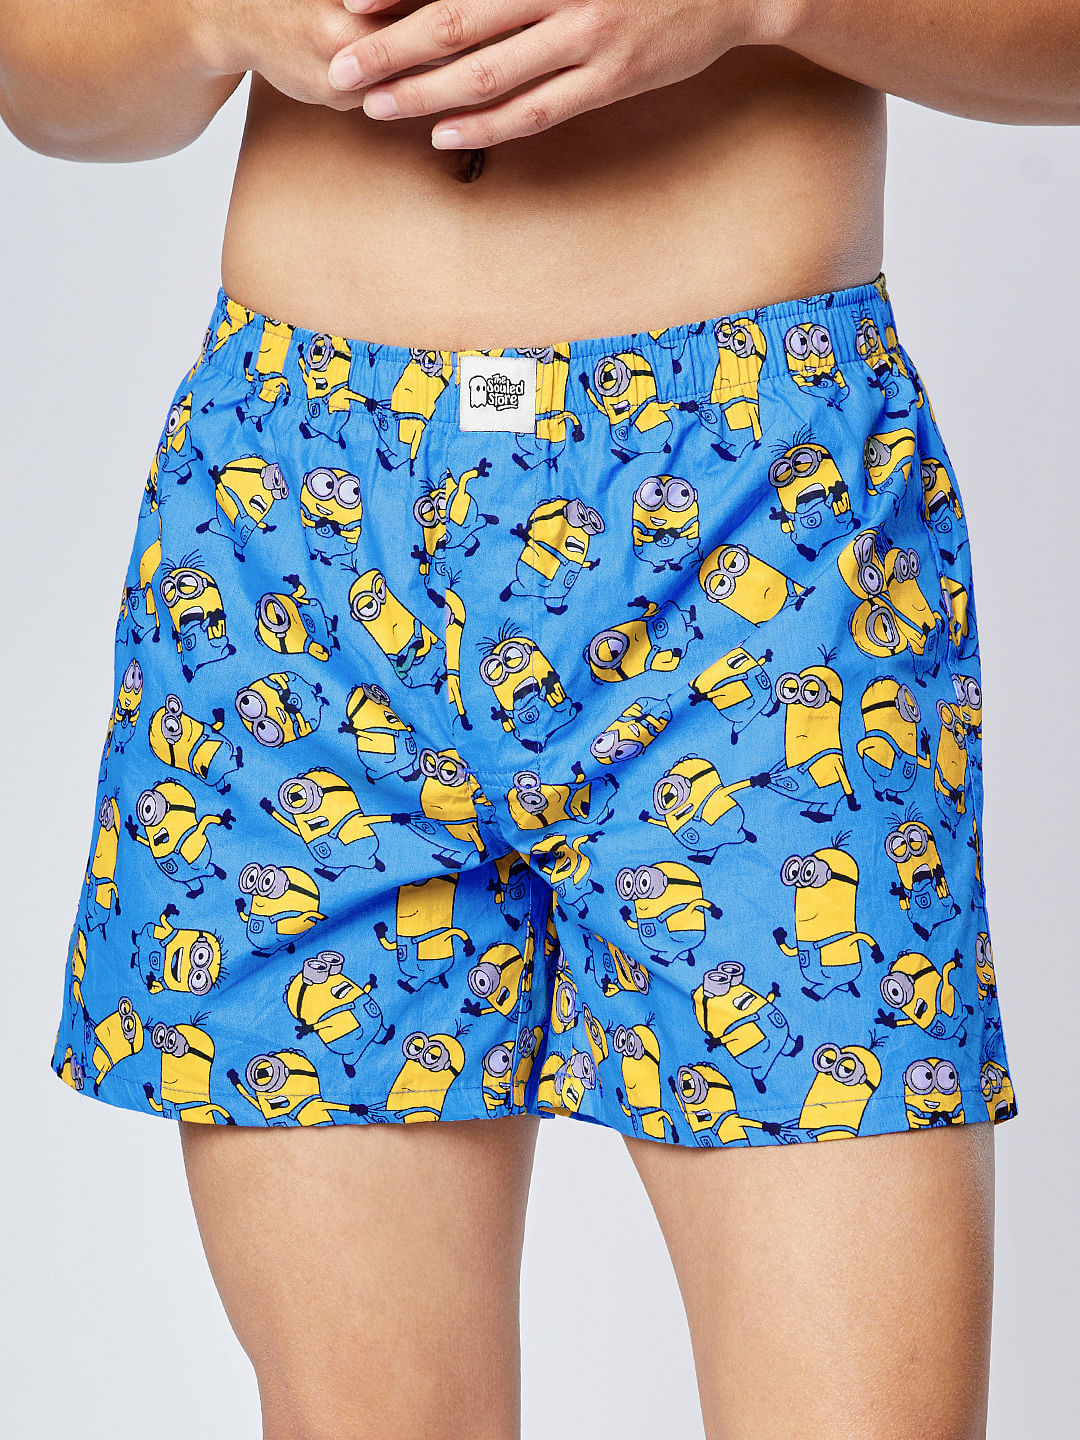 Buy Official Minions Patterns Boxer Shorts Online